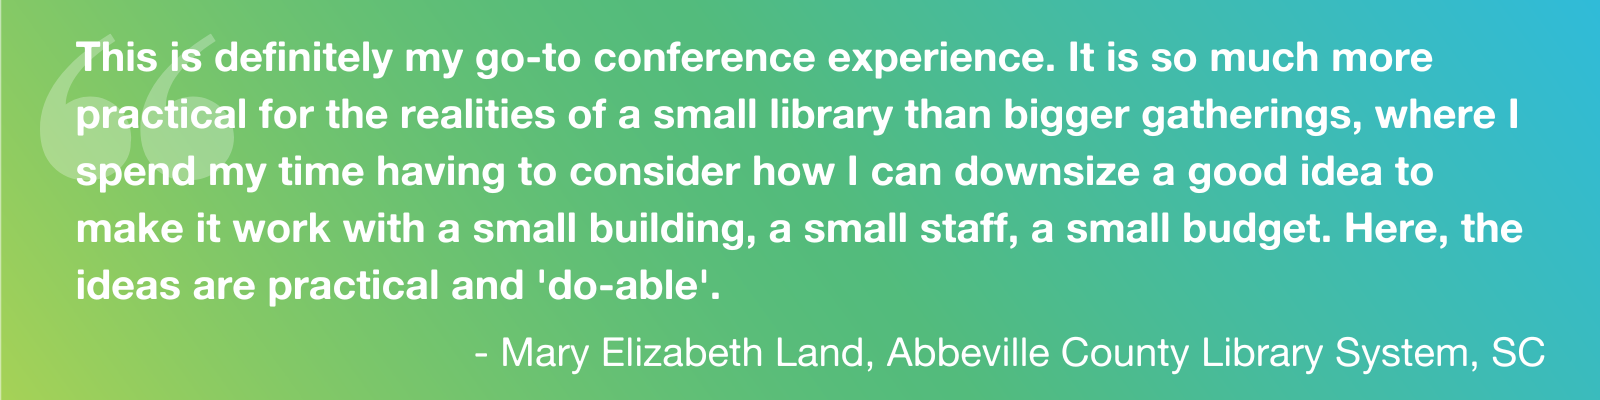 Quote: "This is definitely my go-to conference experience. It is so much more practical for the realities of a small library than bigger gatherings, where I spend my time having to consider how I can downsize a good idea to make it work with a small building, a small staff, a small budget. Here, the ideas are practical and 'do-able'." - Mary Elizabeth Land, Abbeville County Library System, SC